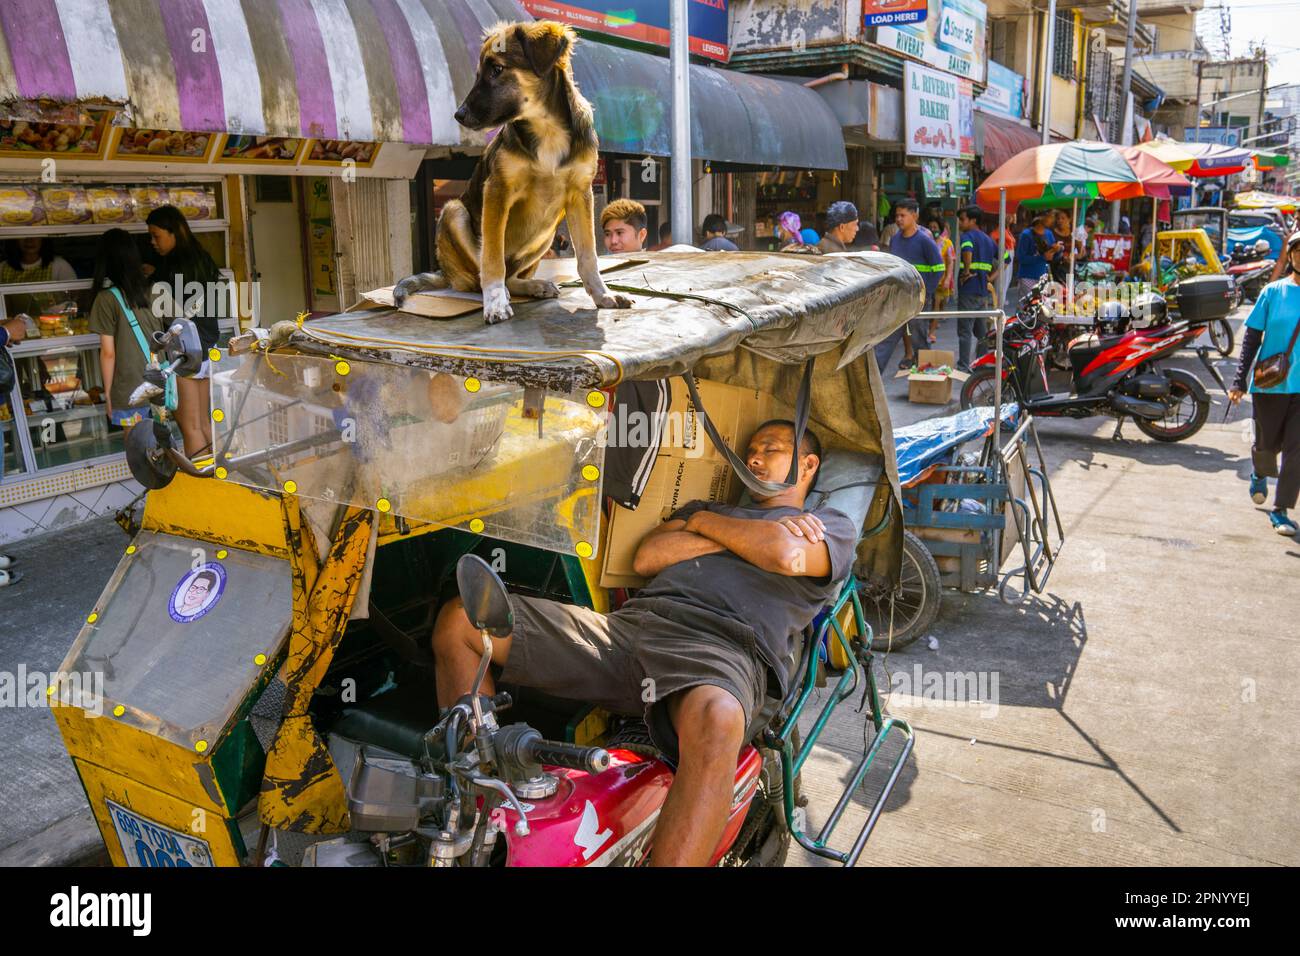 Tuk Tuk , driver sleeping in taxi cab, as dog stands guard on the roof.  Street scenes in the capital of Manila, Philippines. The area known as Intram Stock Photo